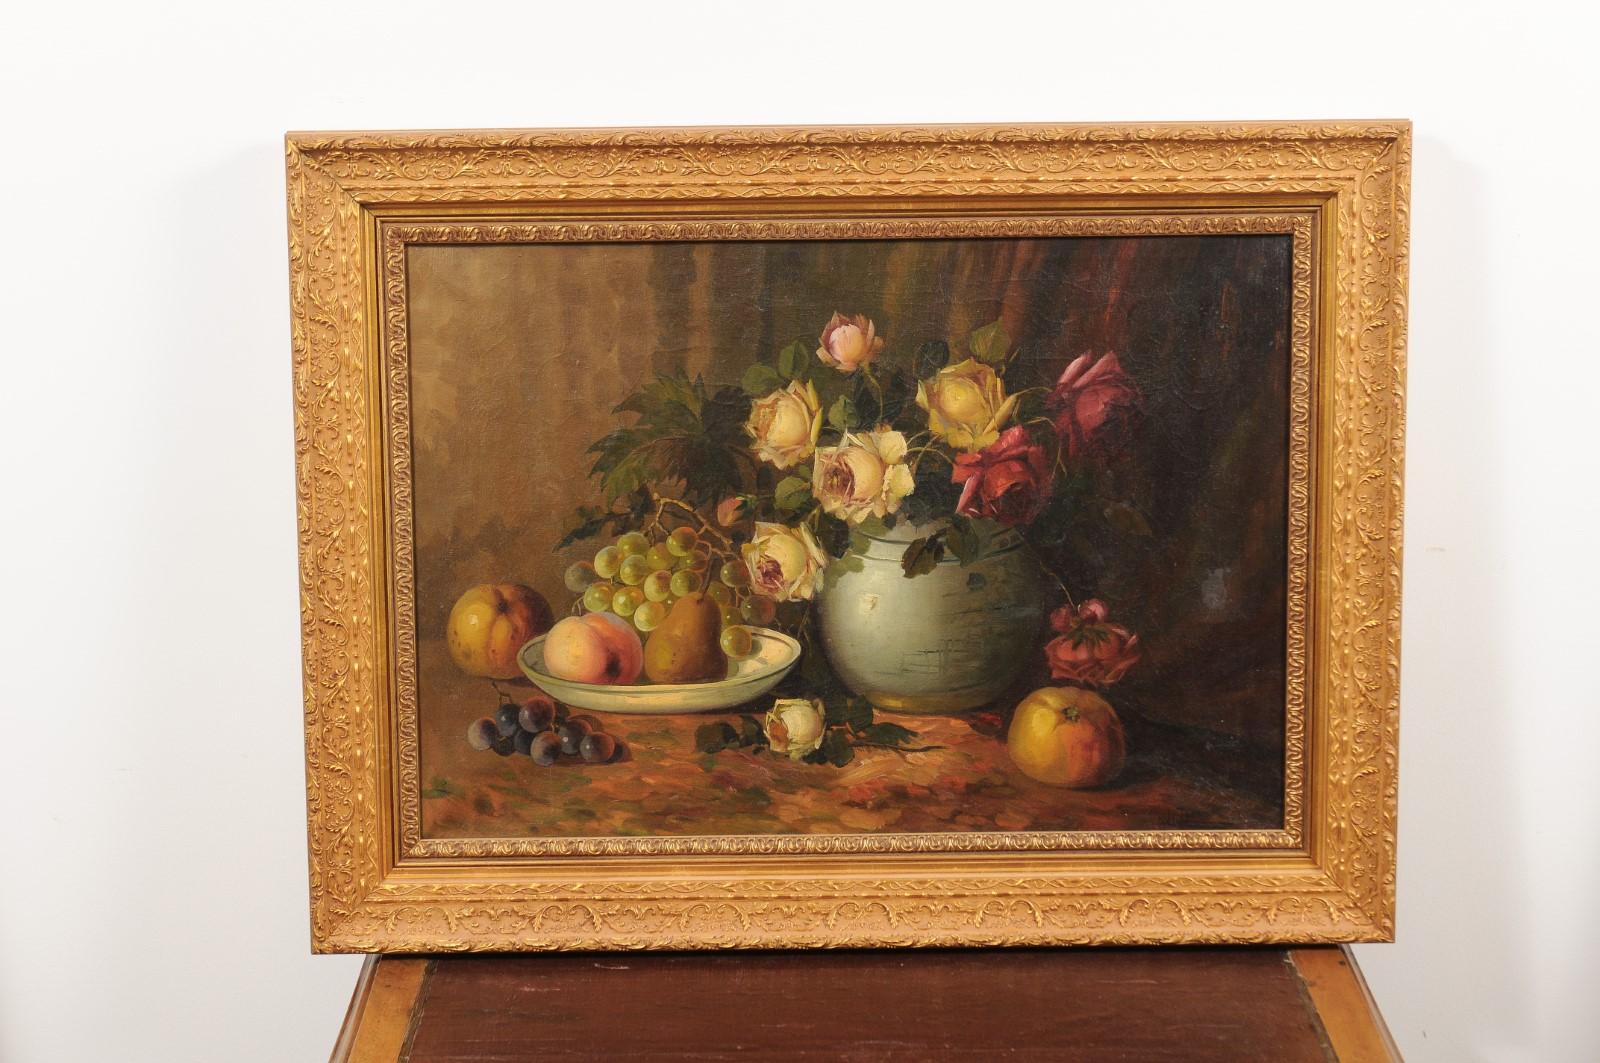 A French Napoleon III period oil on canvas still-life painting from the mid-19th century, depicting fruits and flowers in giltwood frame. Born in France during the reign of Emperor Napoleon III, this oil on canvas painting depicts a delicate